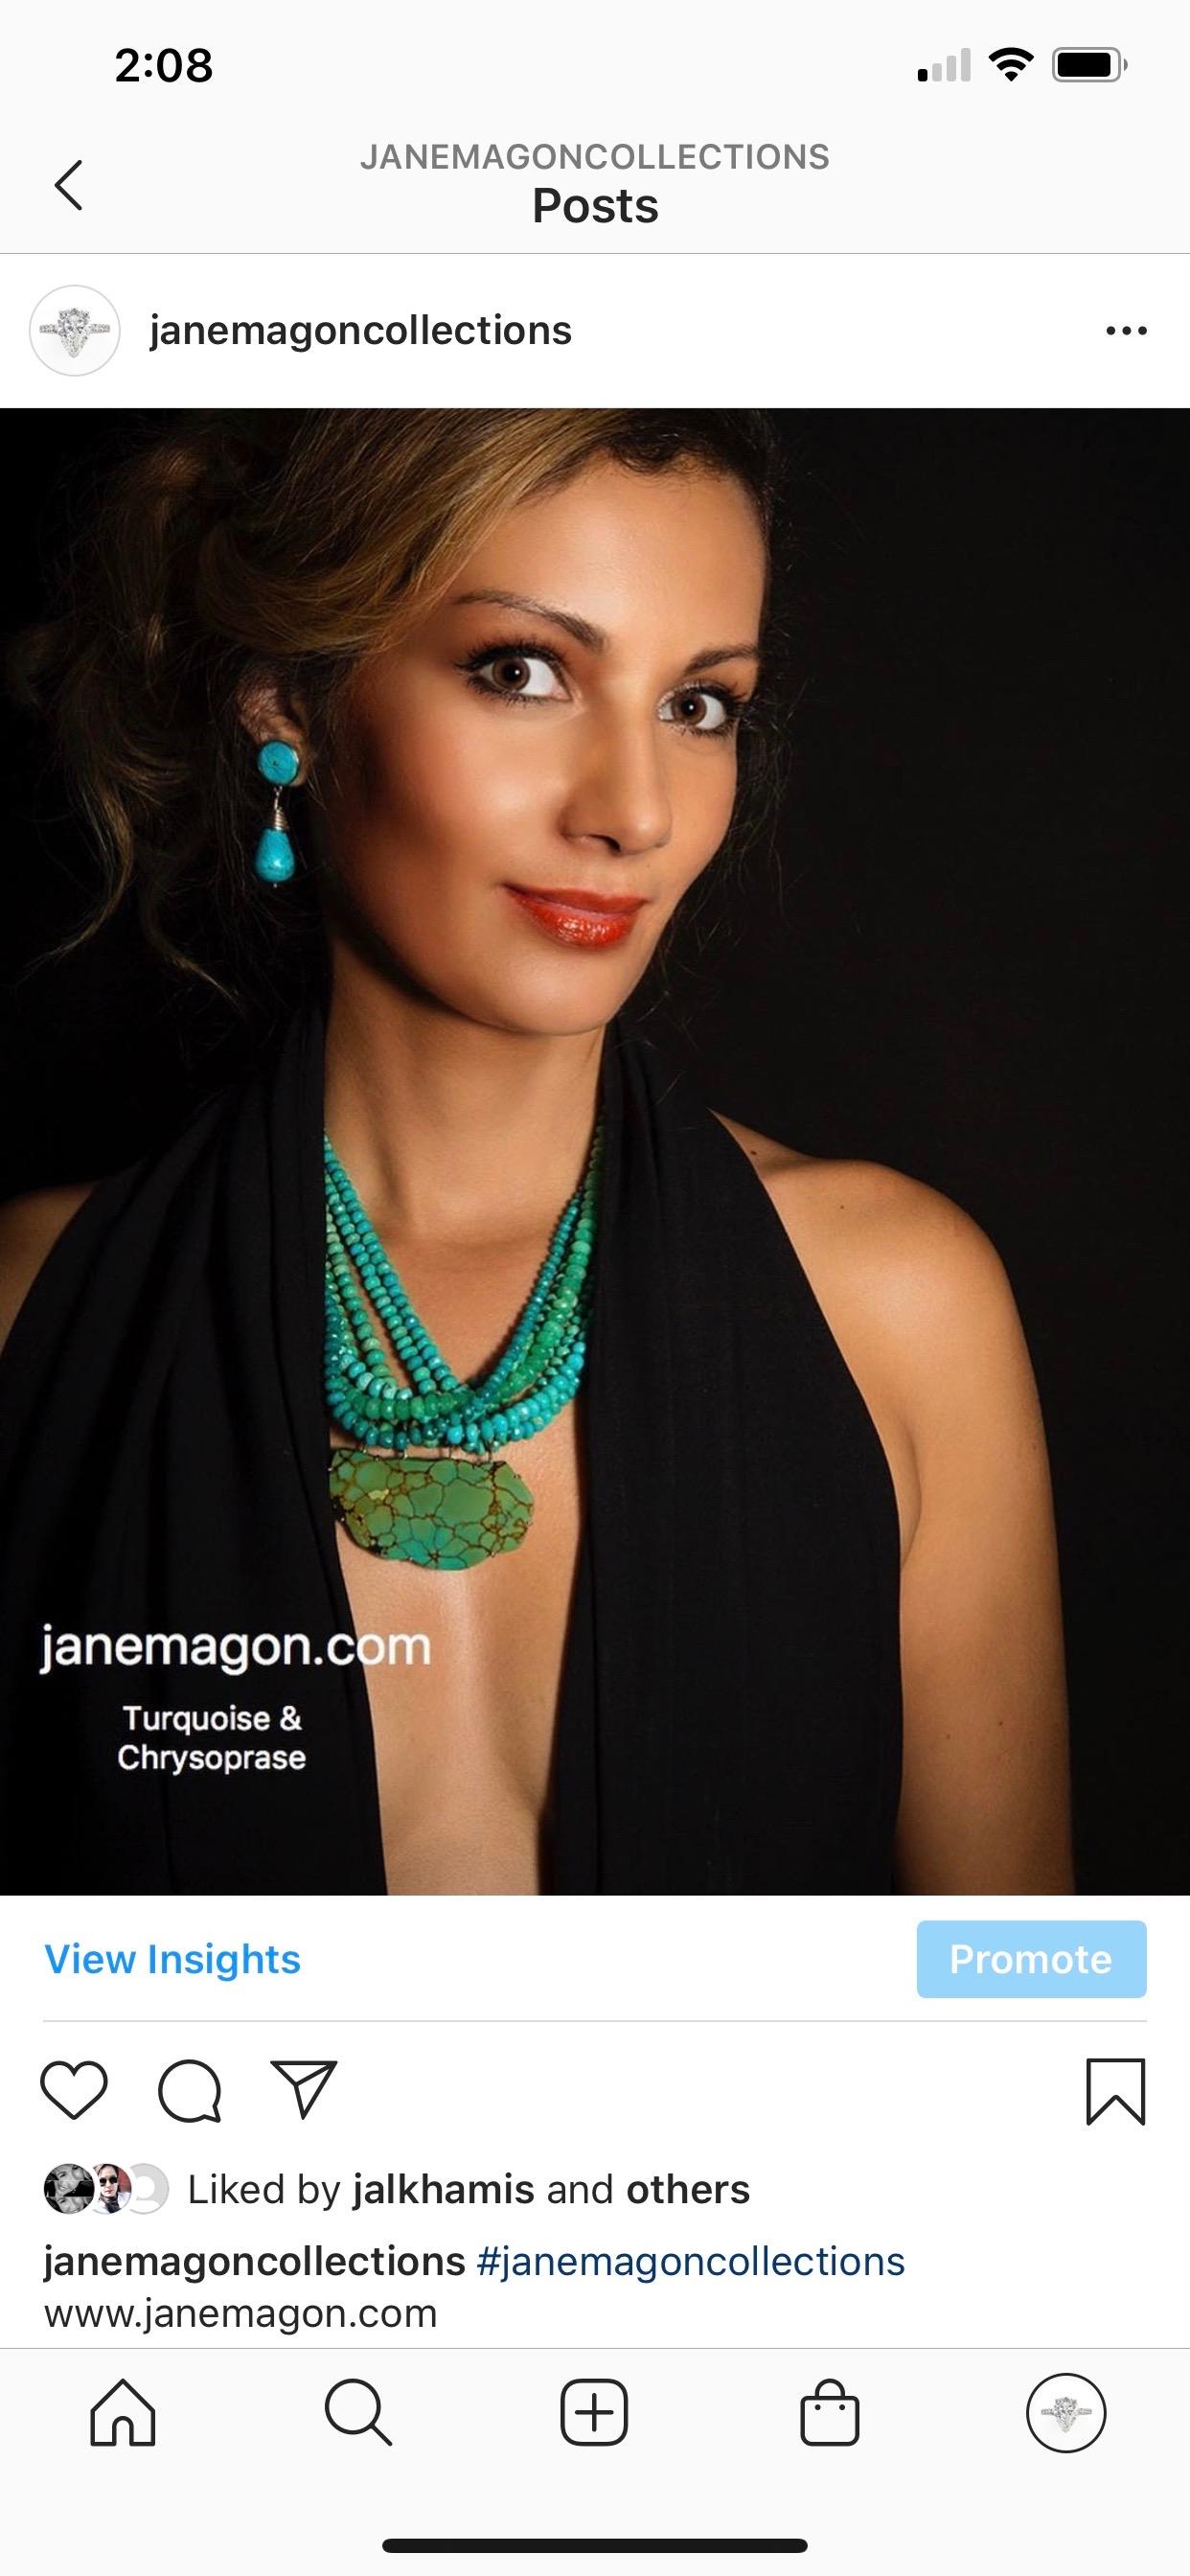 Jane Magon Collections Business Woman Choker with Chrysoprase beads intertwined with Turquoise beads forming a multistrand chic necklace with a misshapen drop and clasp of Turquoise both set in Sterling Silver. There are Seven Strands all together.